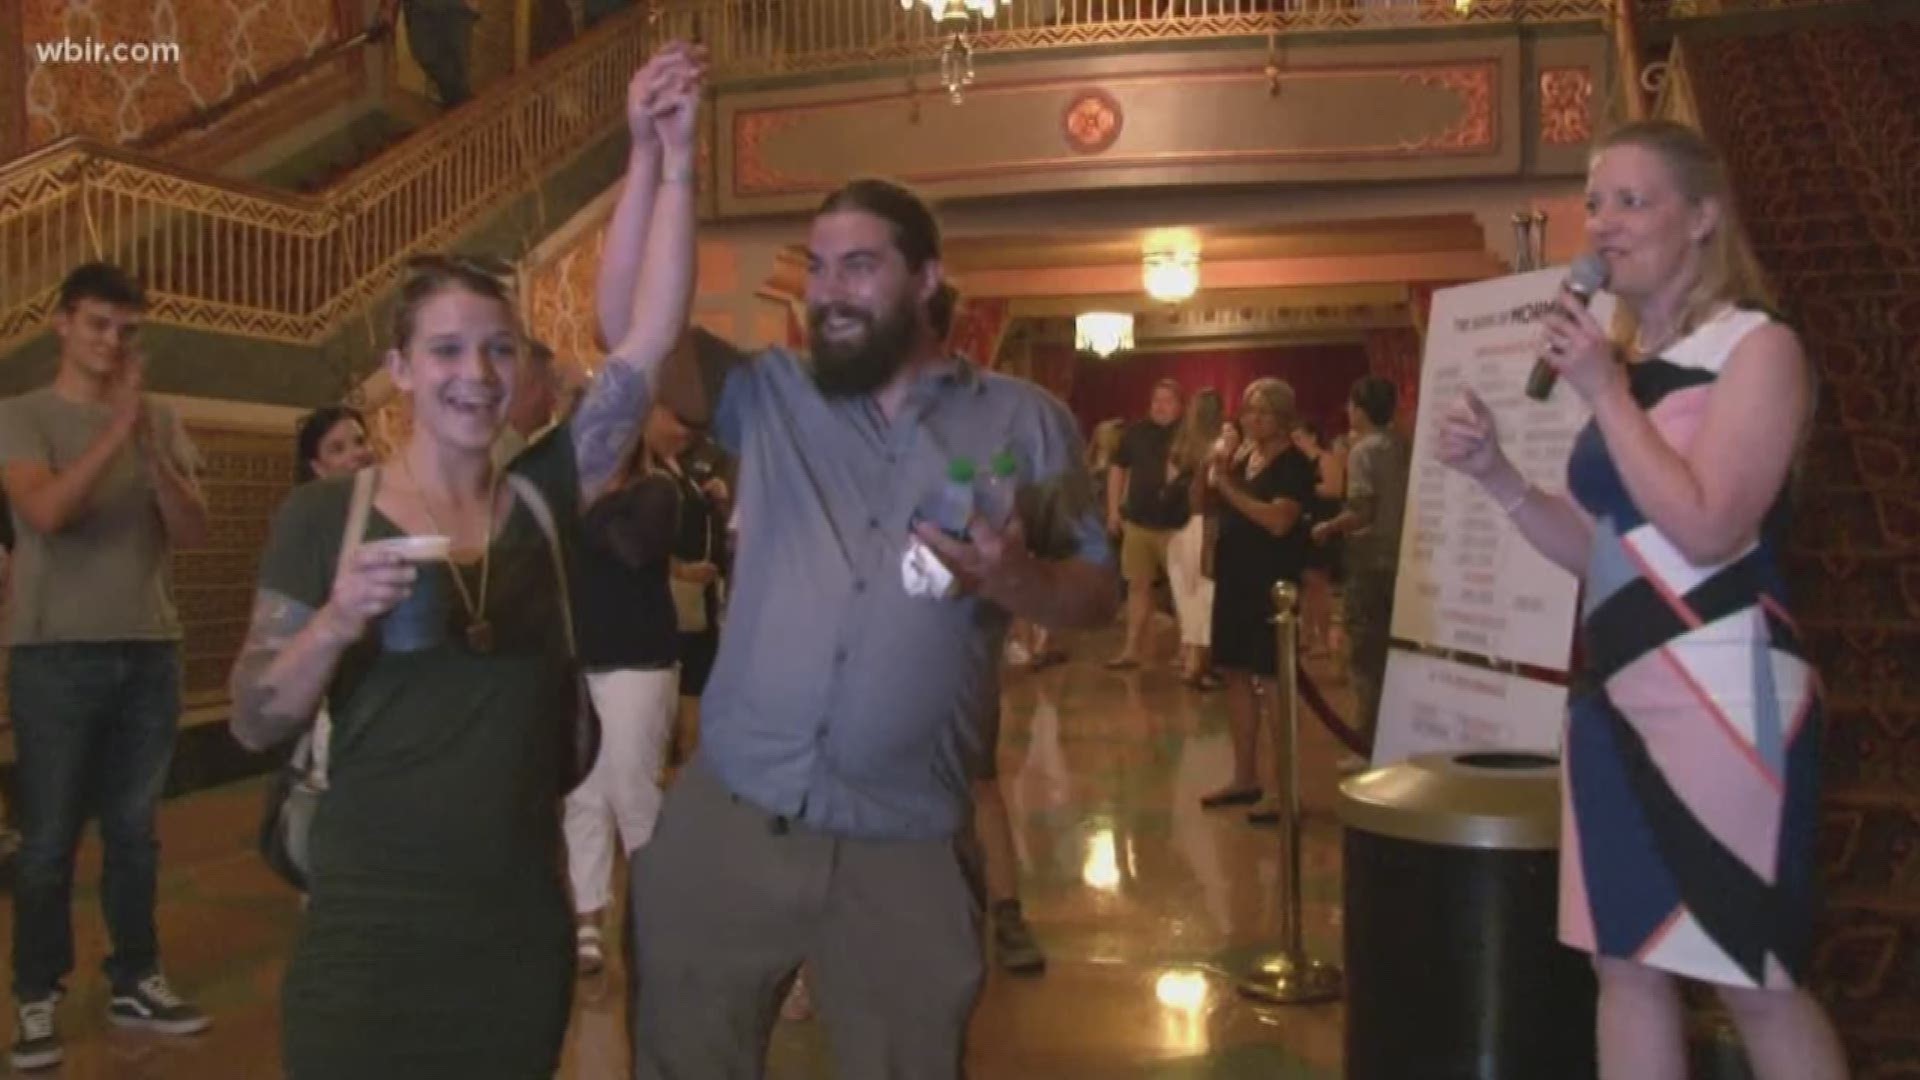 An Asheville couple went home with much more than a ticket stub from the Book of Mormon.